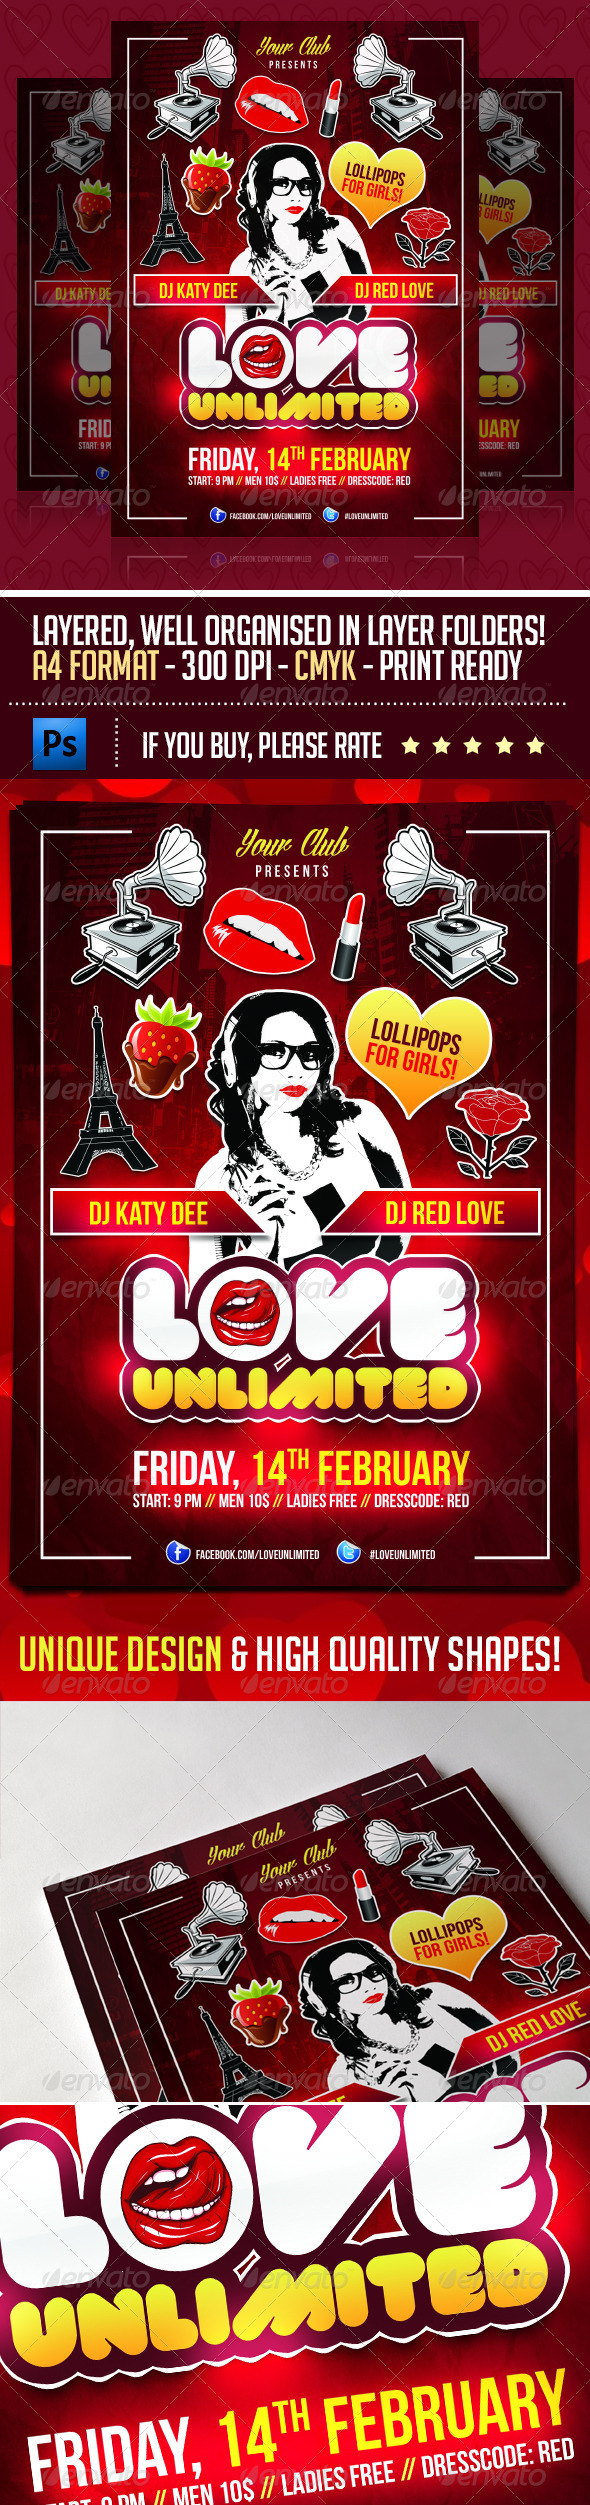 Love Unlimited Valentines Day Flyer